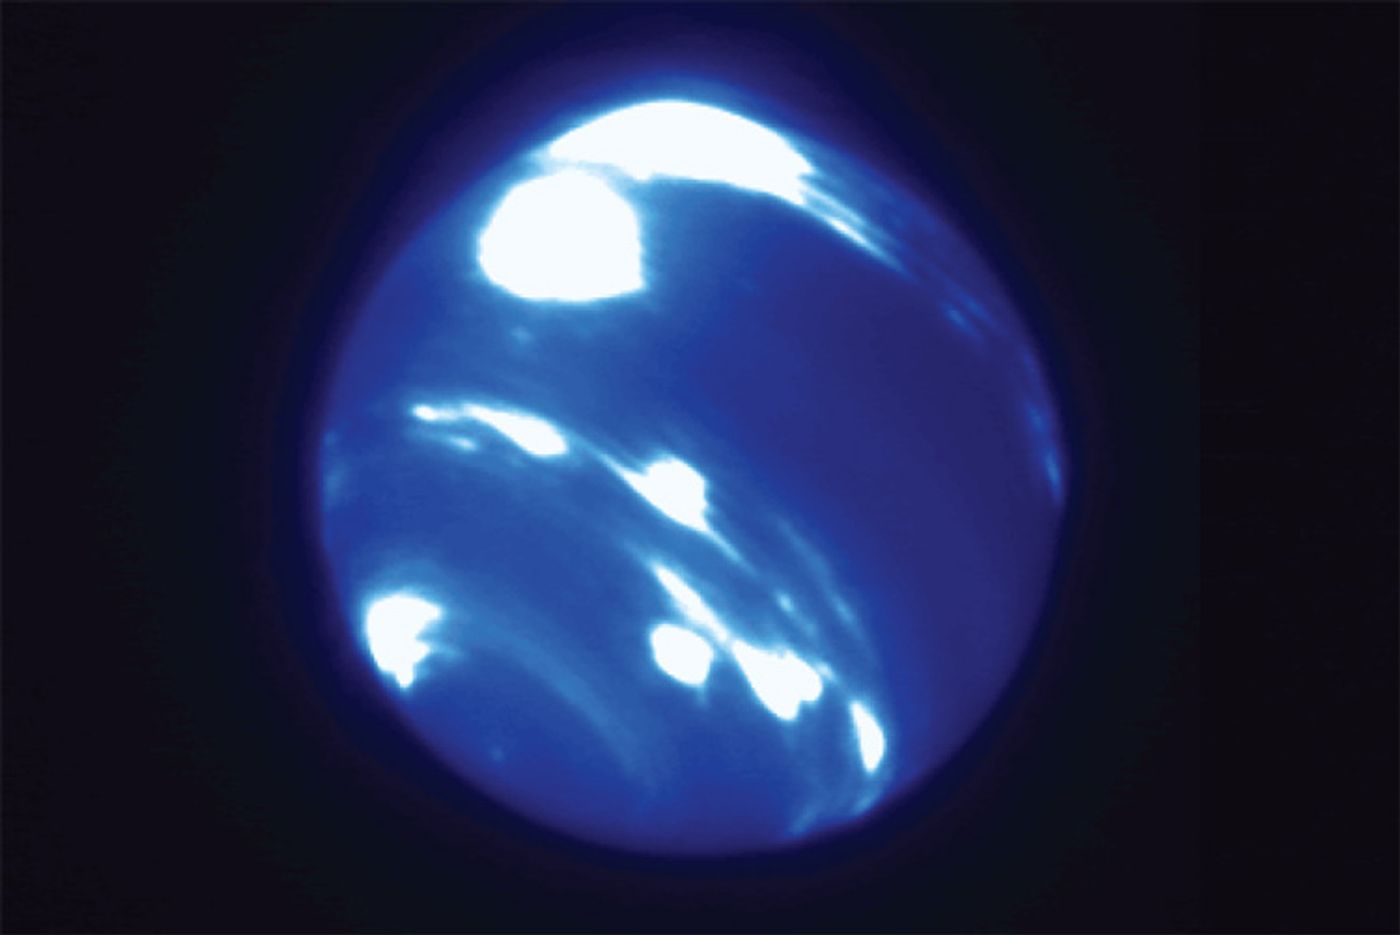 A enlarged image of the low-latitude storm found on Neptune.